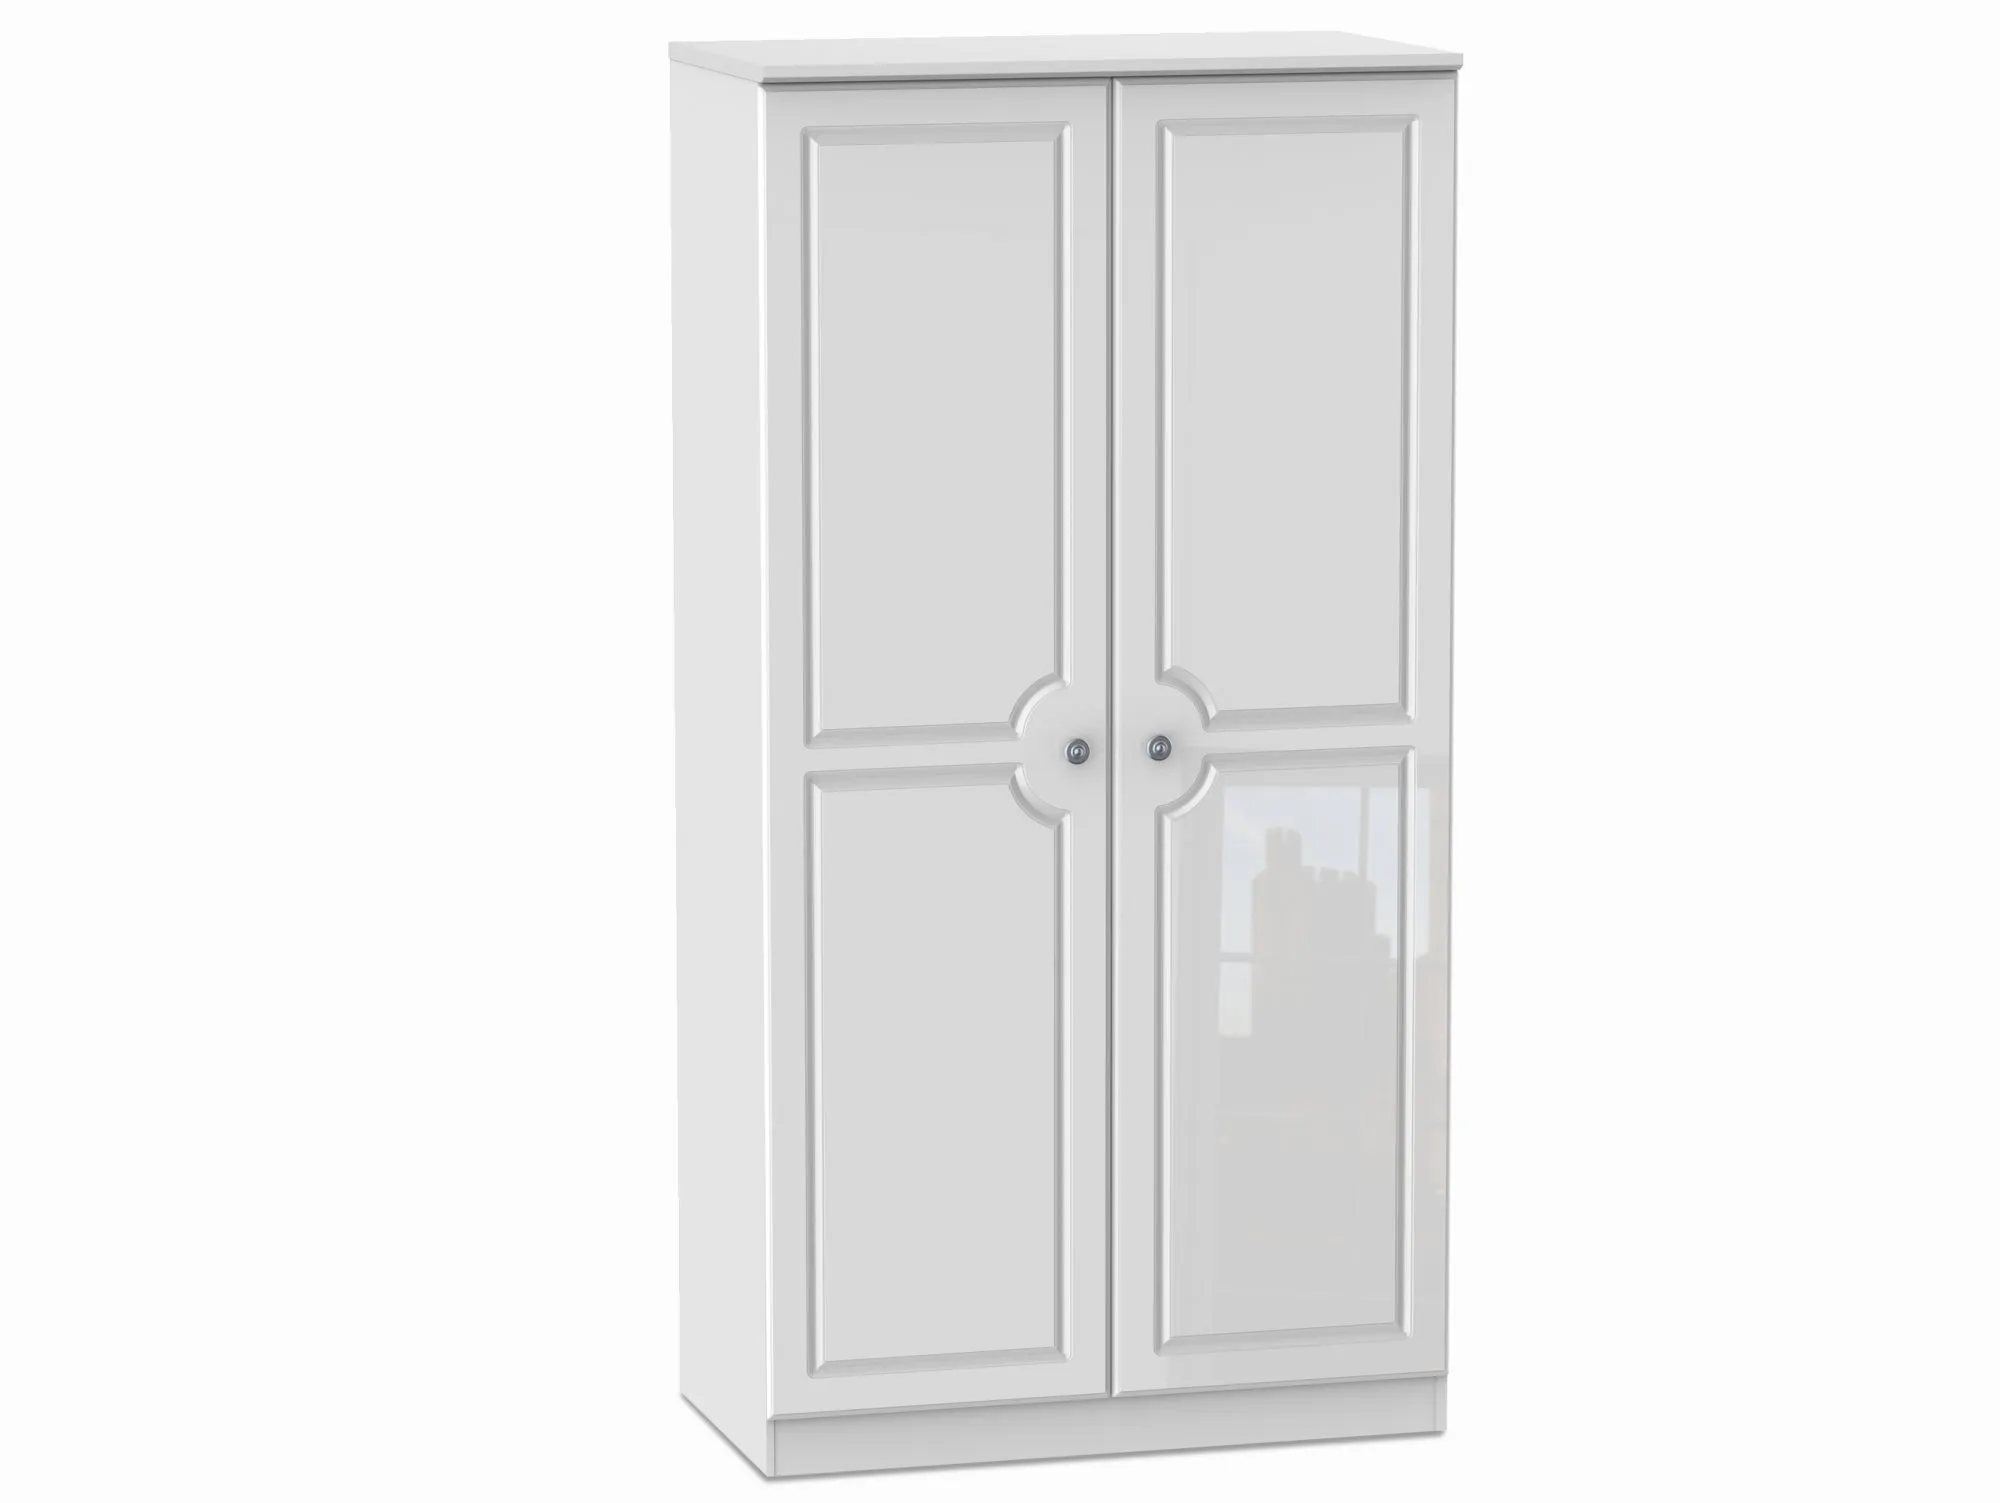 Welcome Welcome 3ft Pembroke White High Gloss 2 Door Double Wardrobe (Assembled)